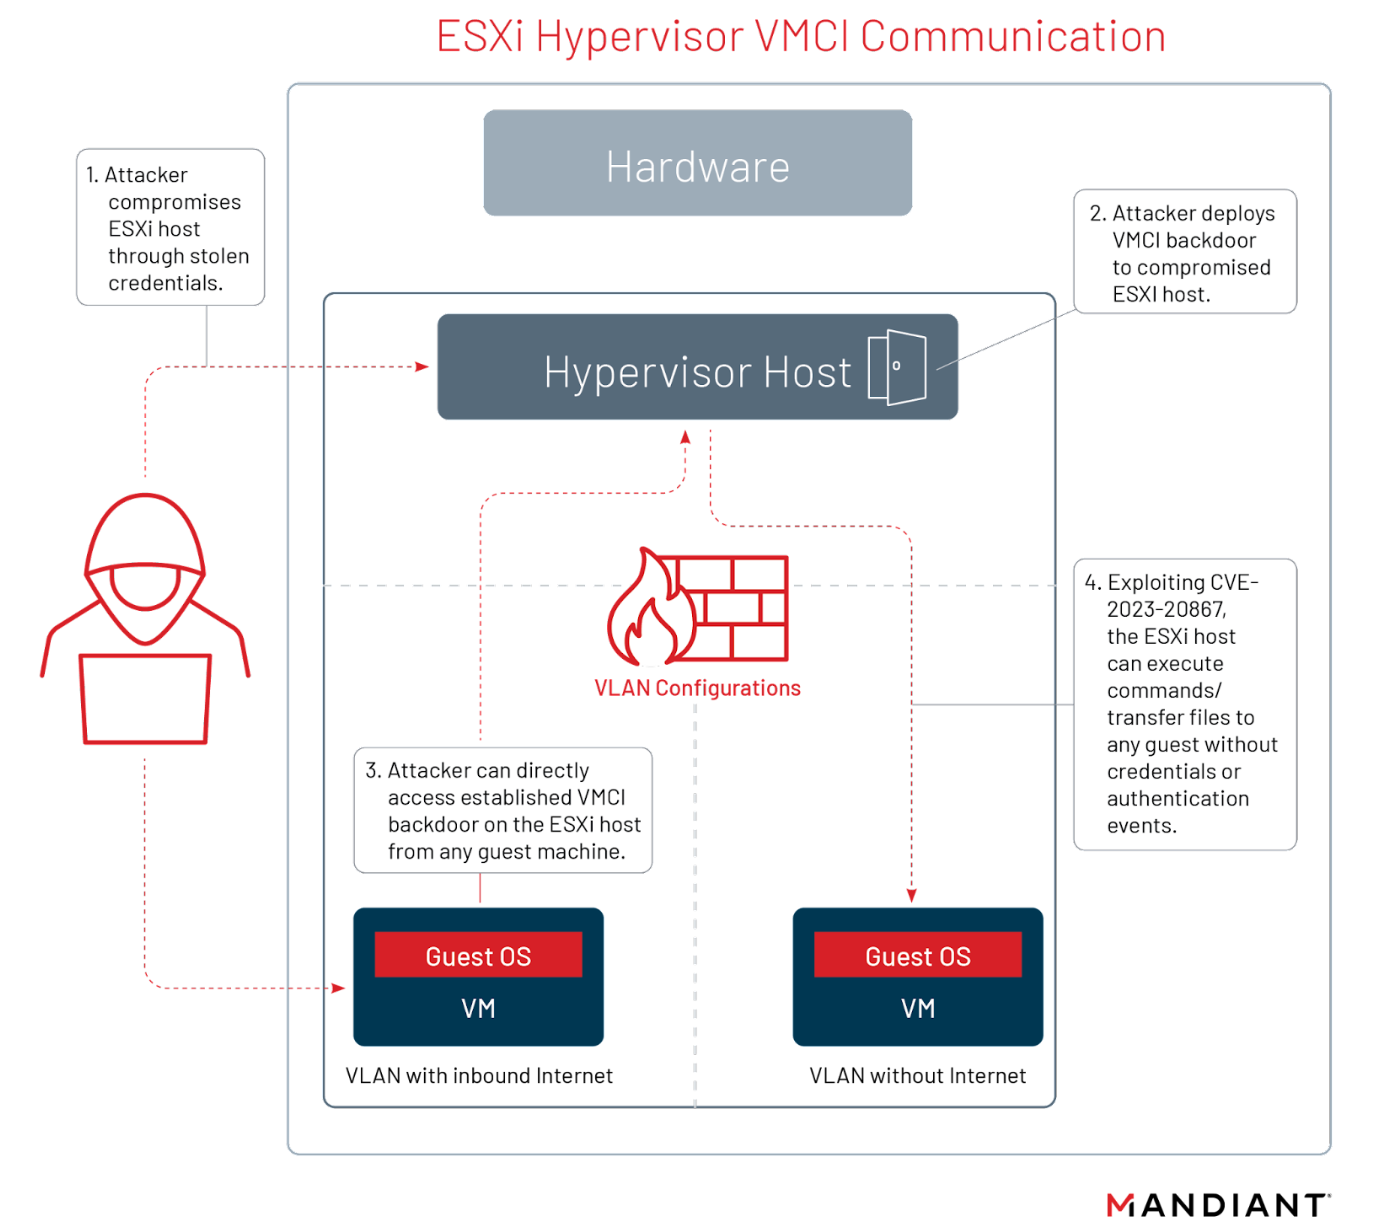 Overview of attacker’s use of ESXi Hypervisor VMCI Communications